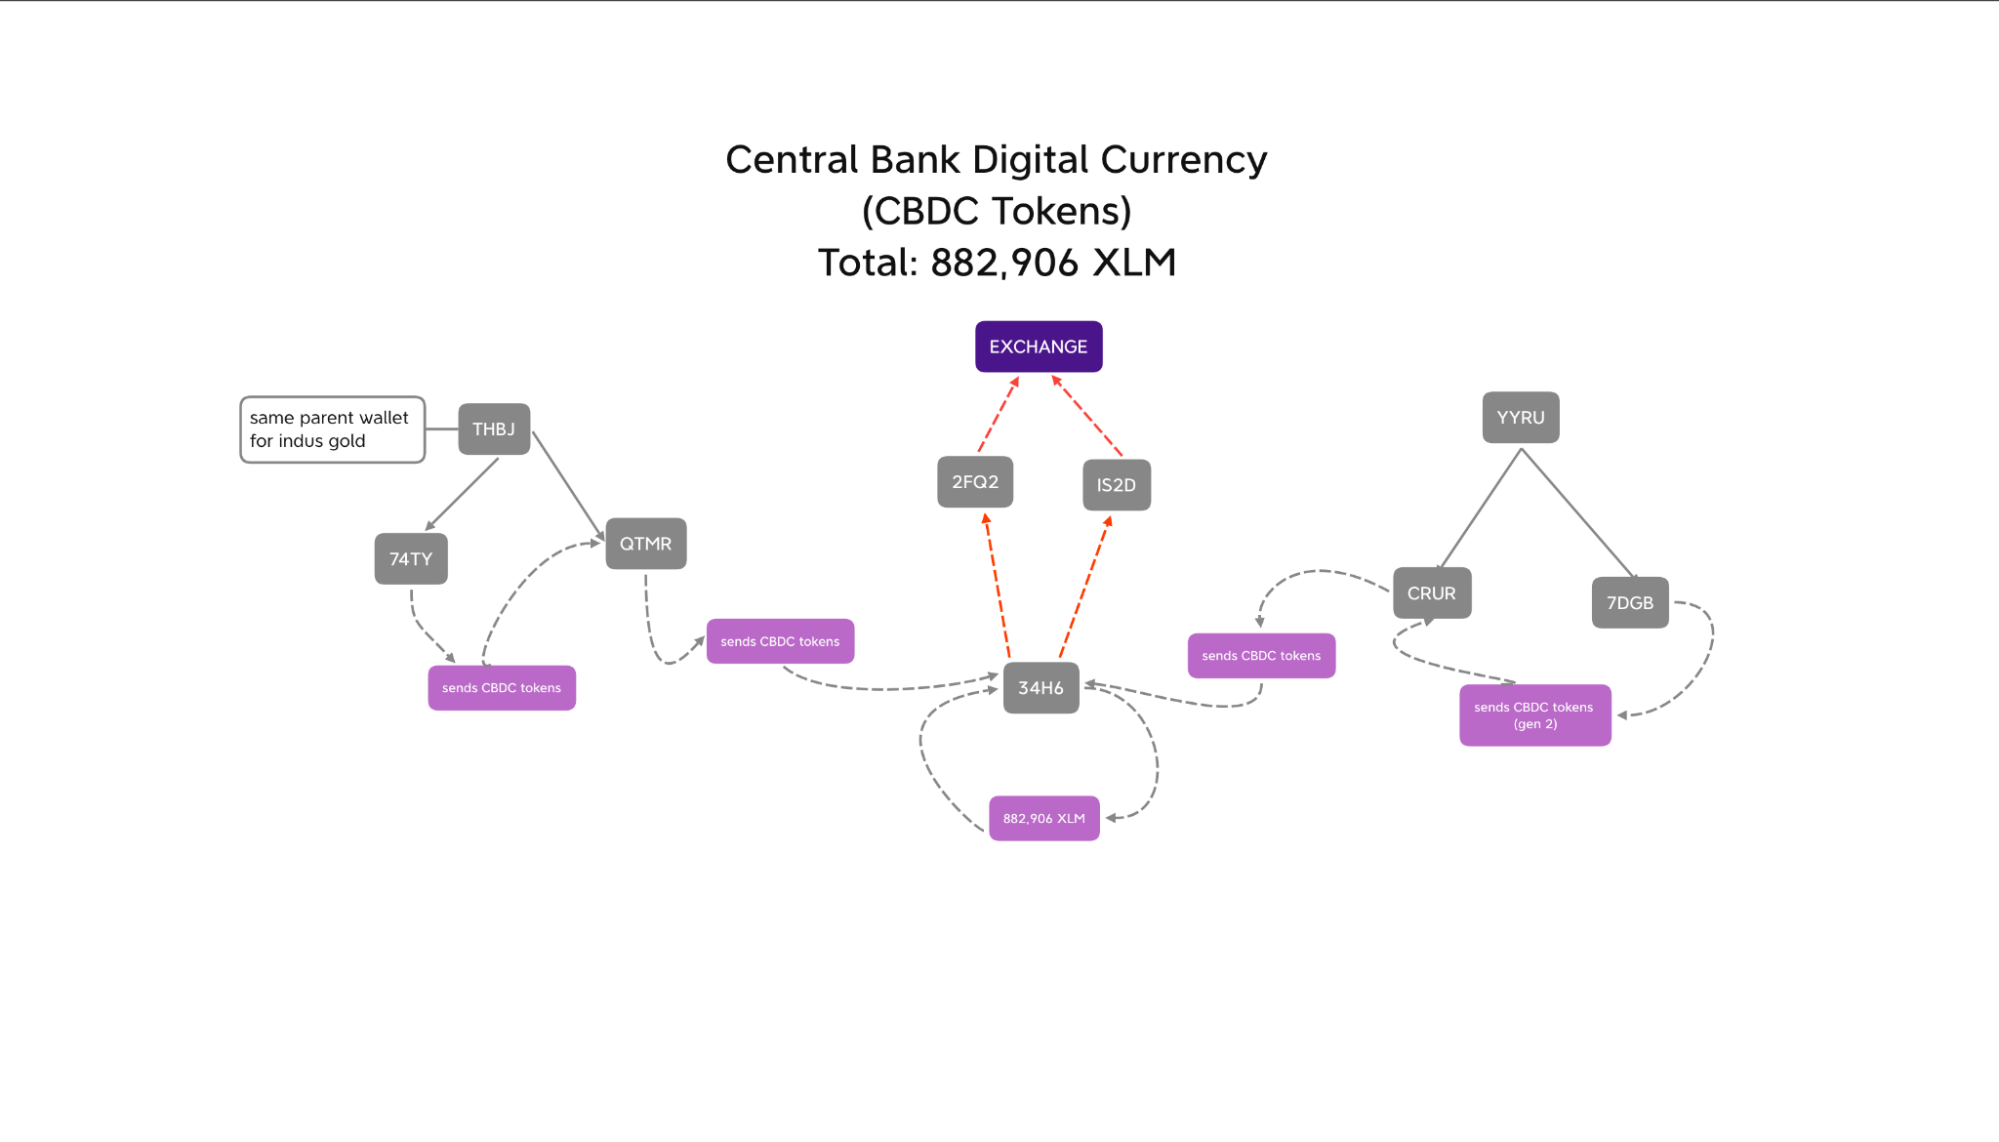 A map titled "Central Bank Digital Currency" showing the connections between the wallet that minted the CBDC tokens, and the wallets that made all of the profit from the tokens. Total profit was 882,906 XLM.